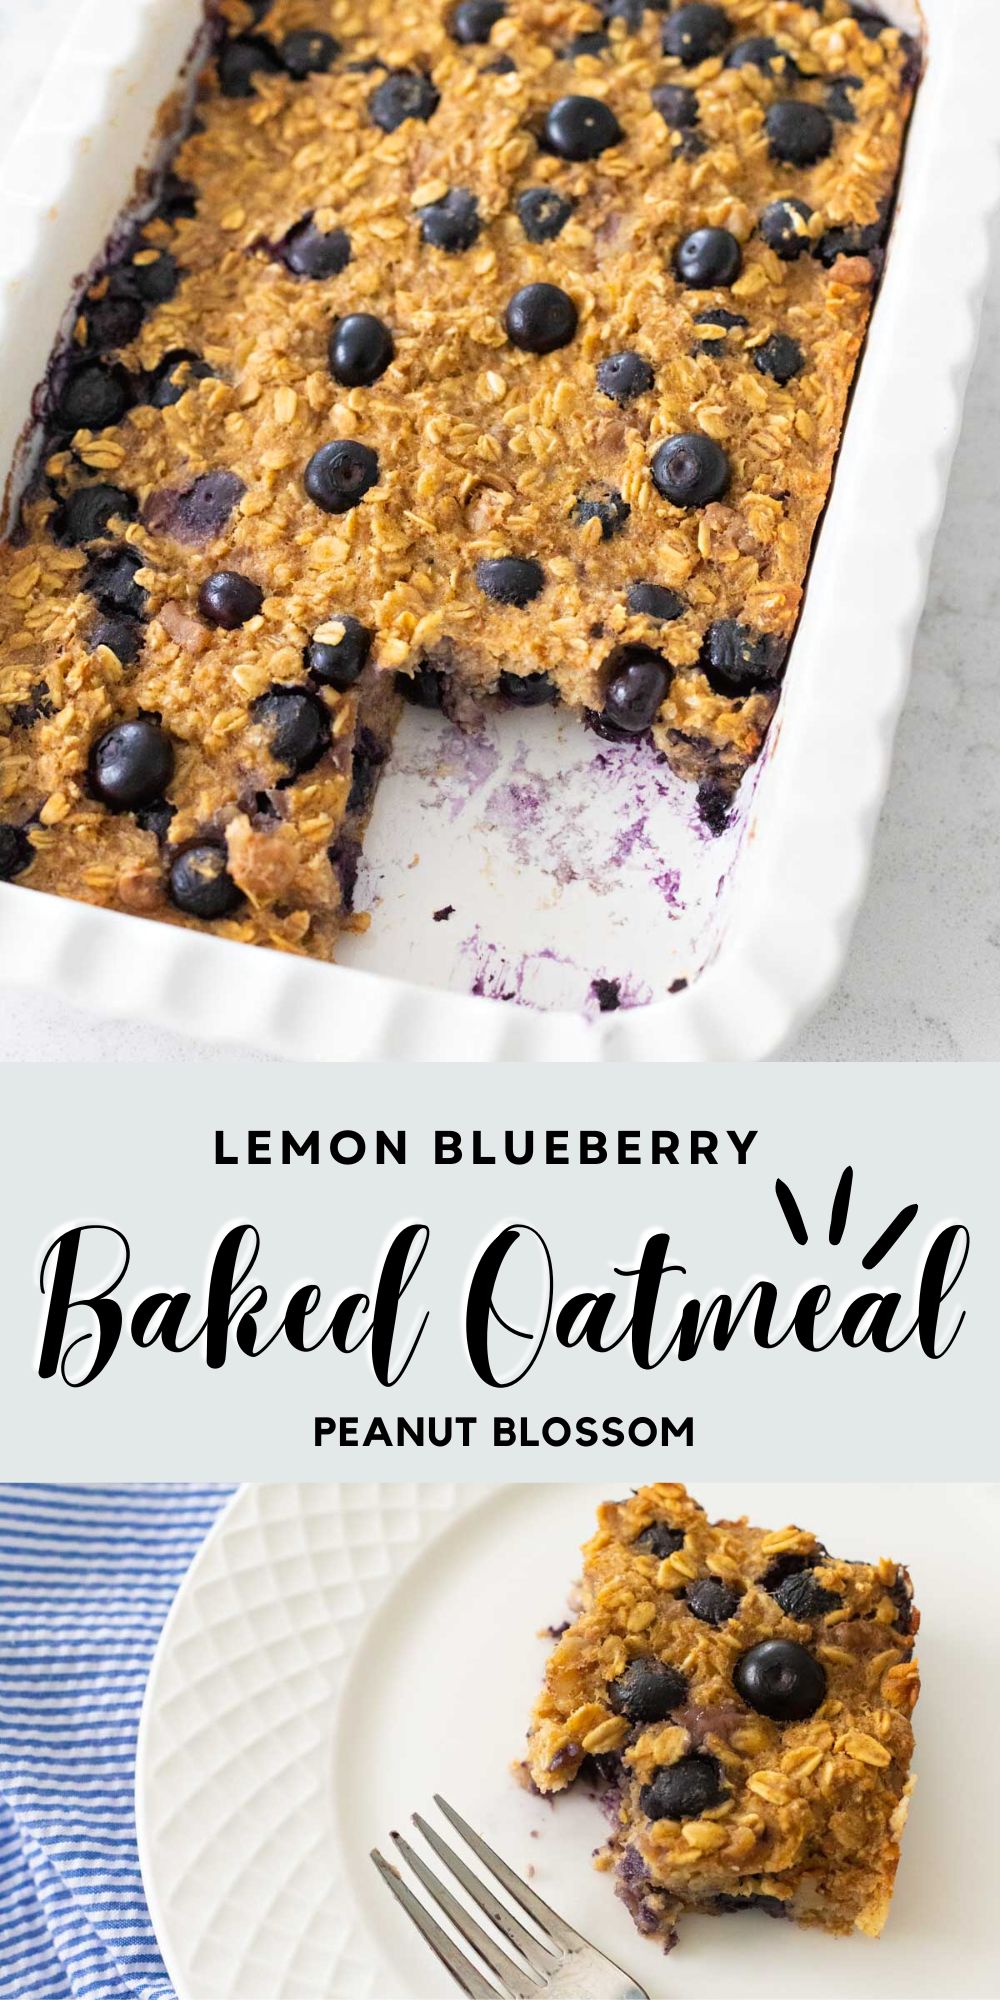 The photo collage shows the finished baking pan of blueberry oatmeal on top and a plate with the single square of oatmeal below.